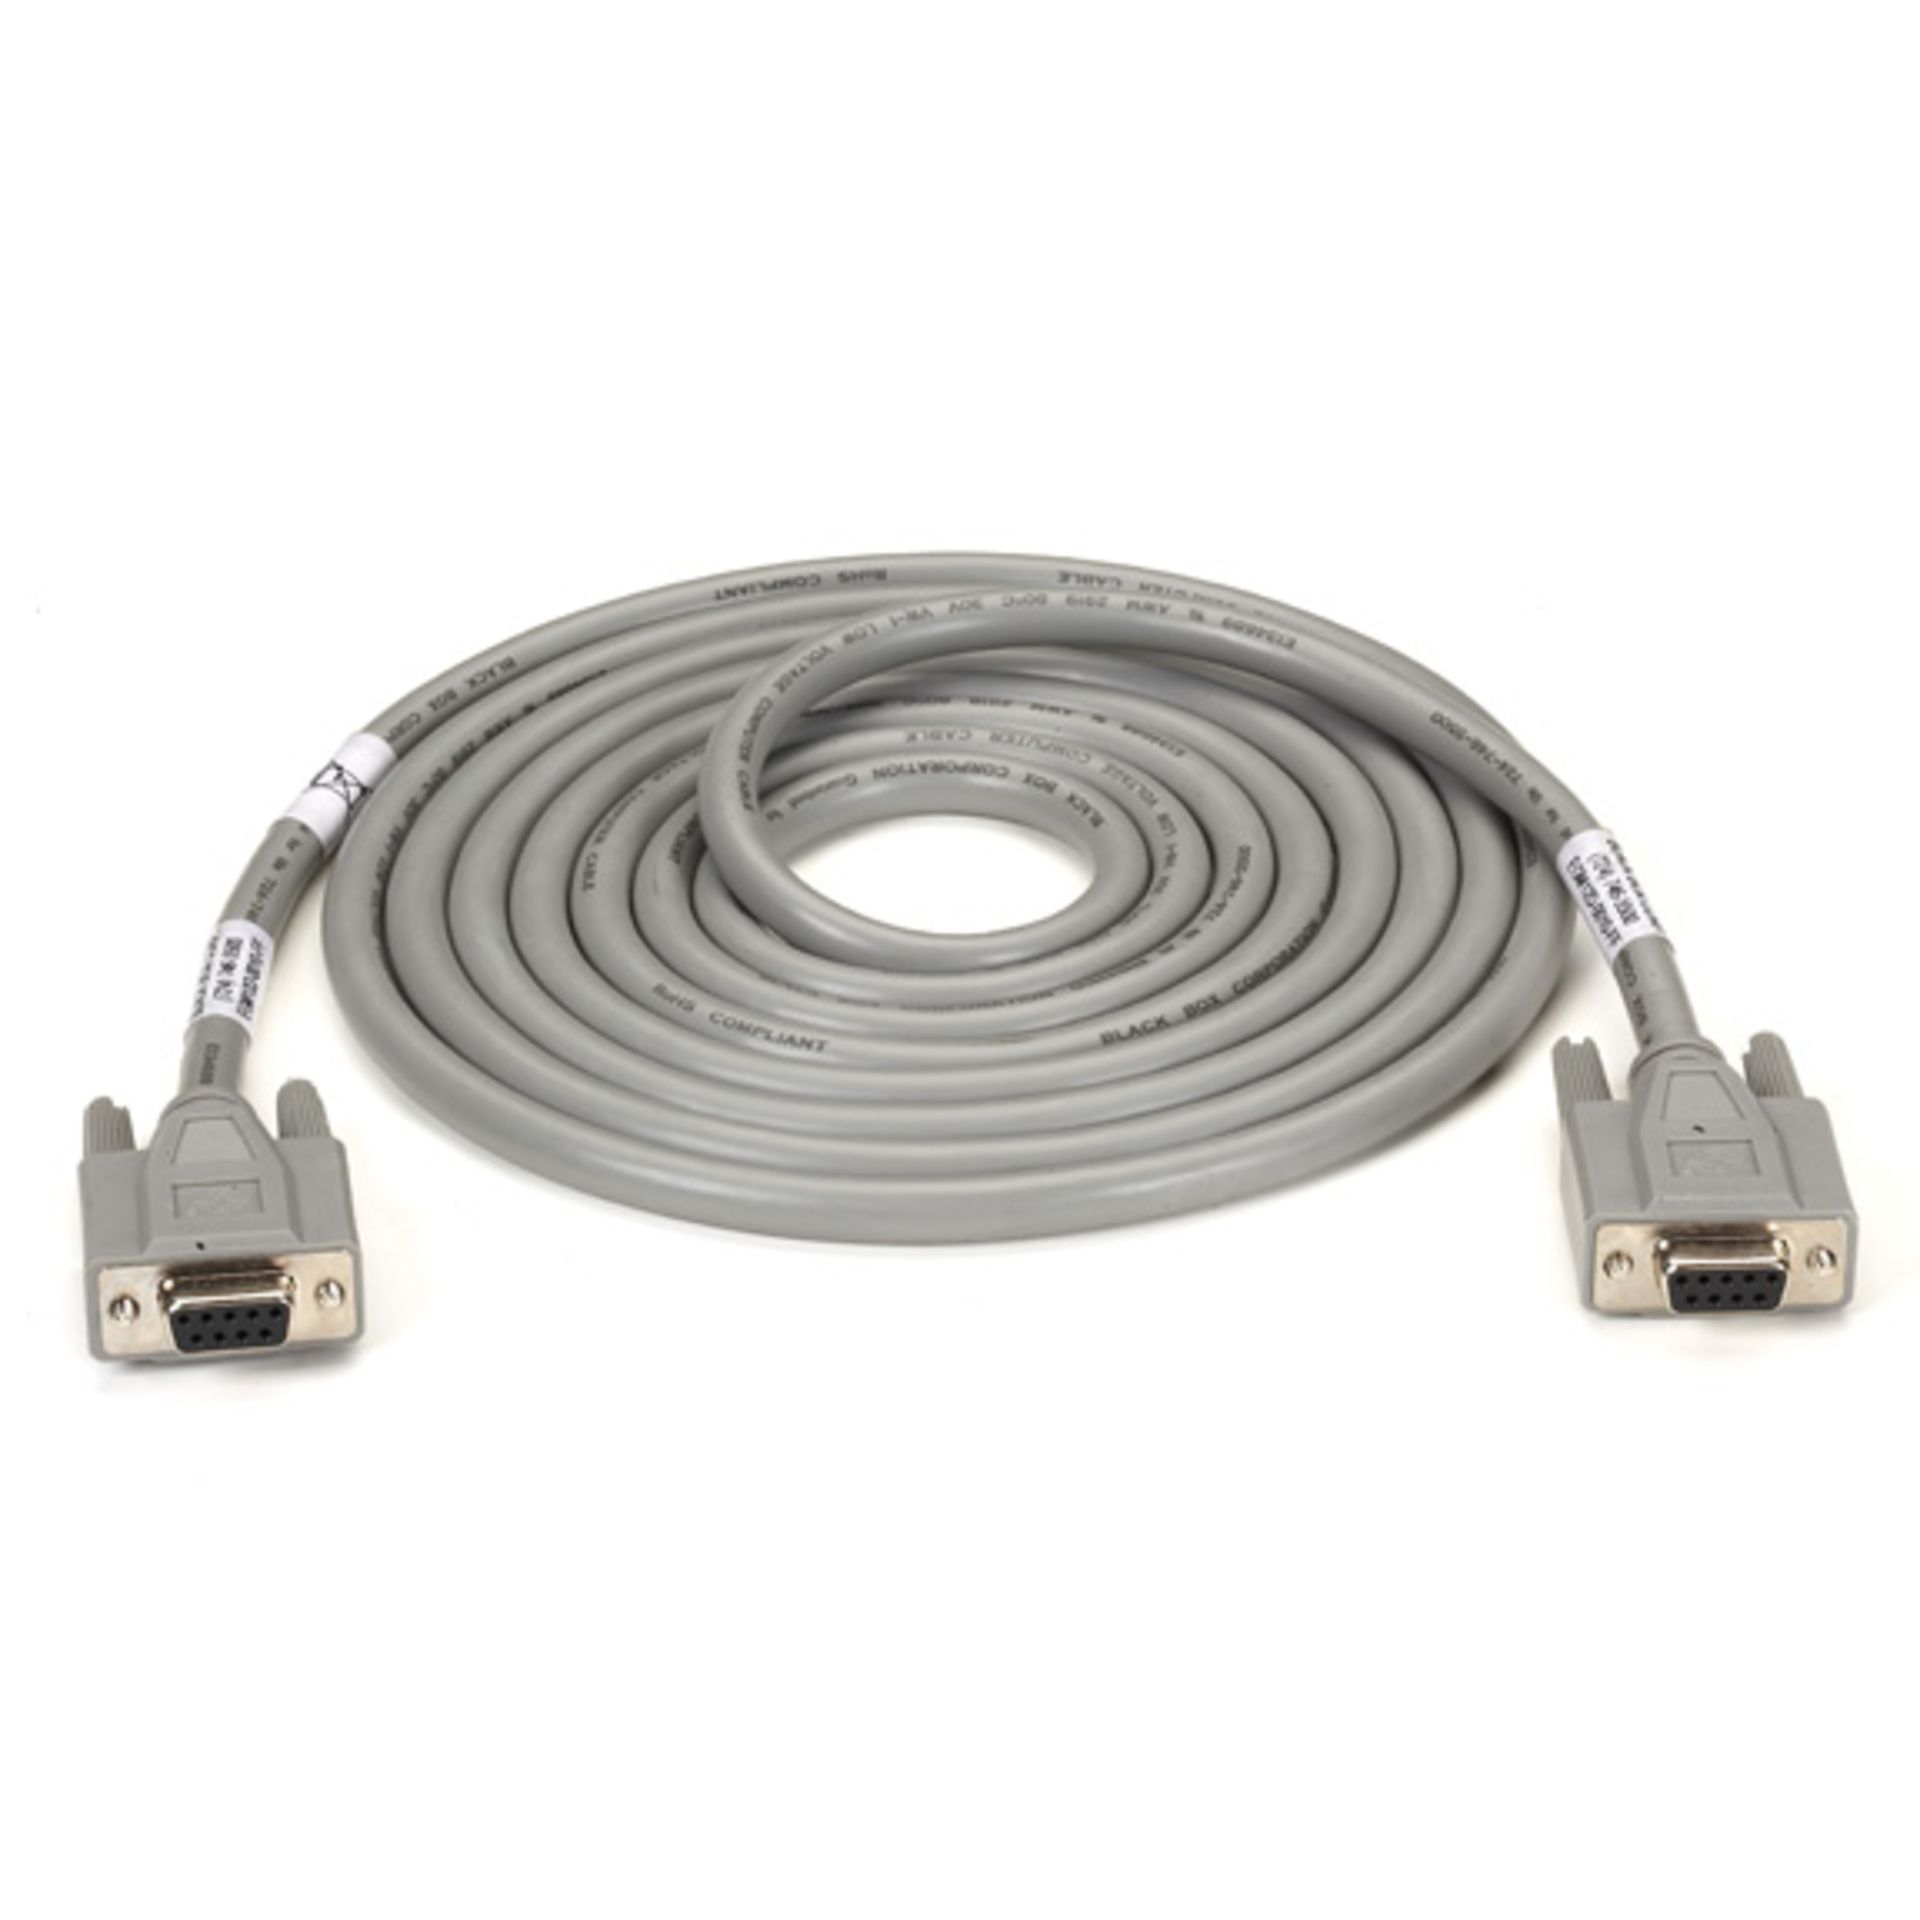 Serial Cables, Coax Cables, Secure Switch Cable